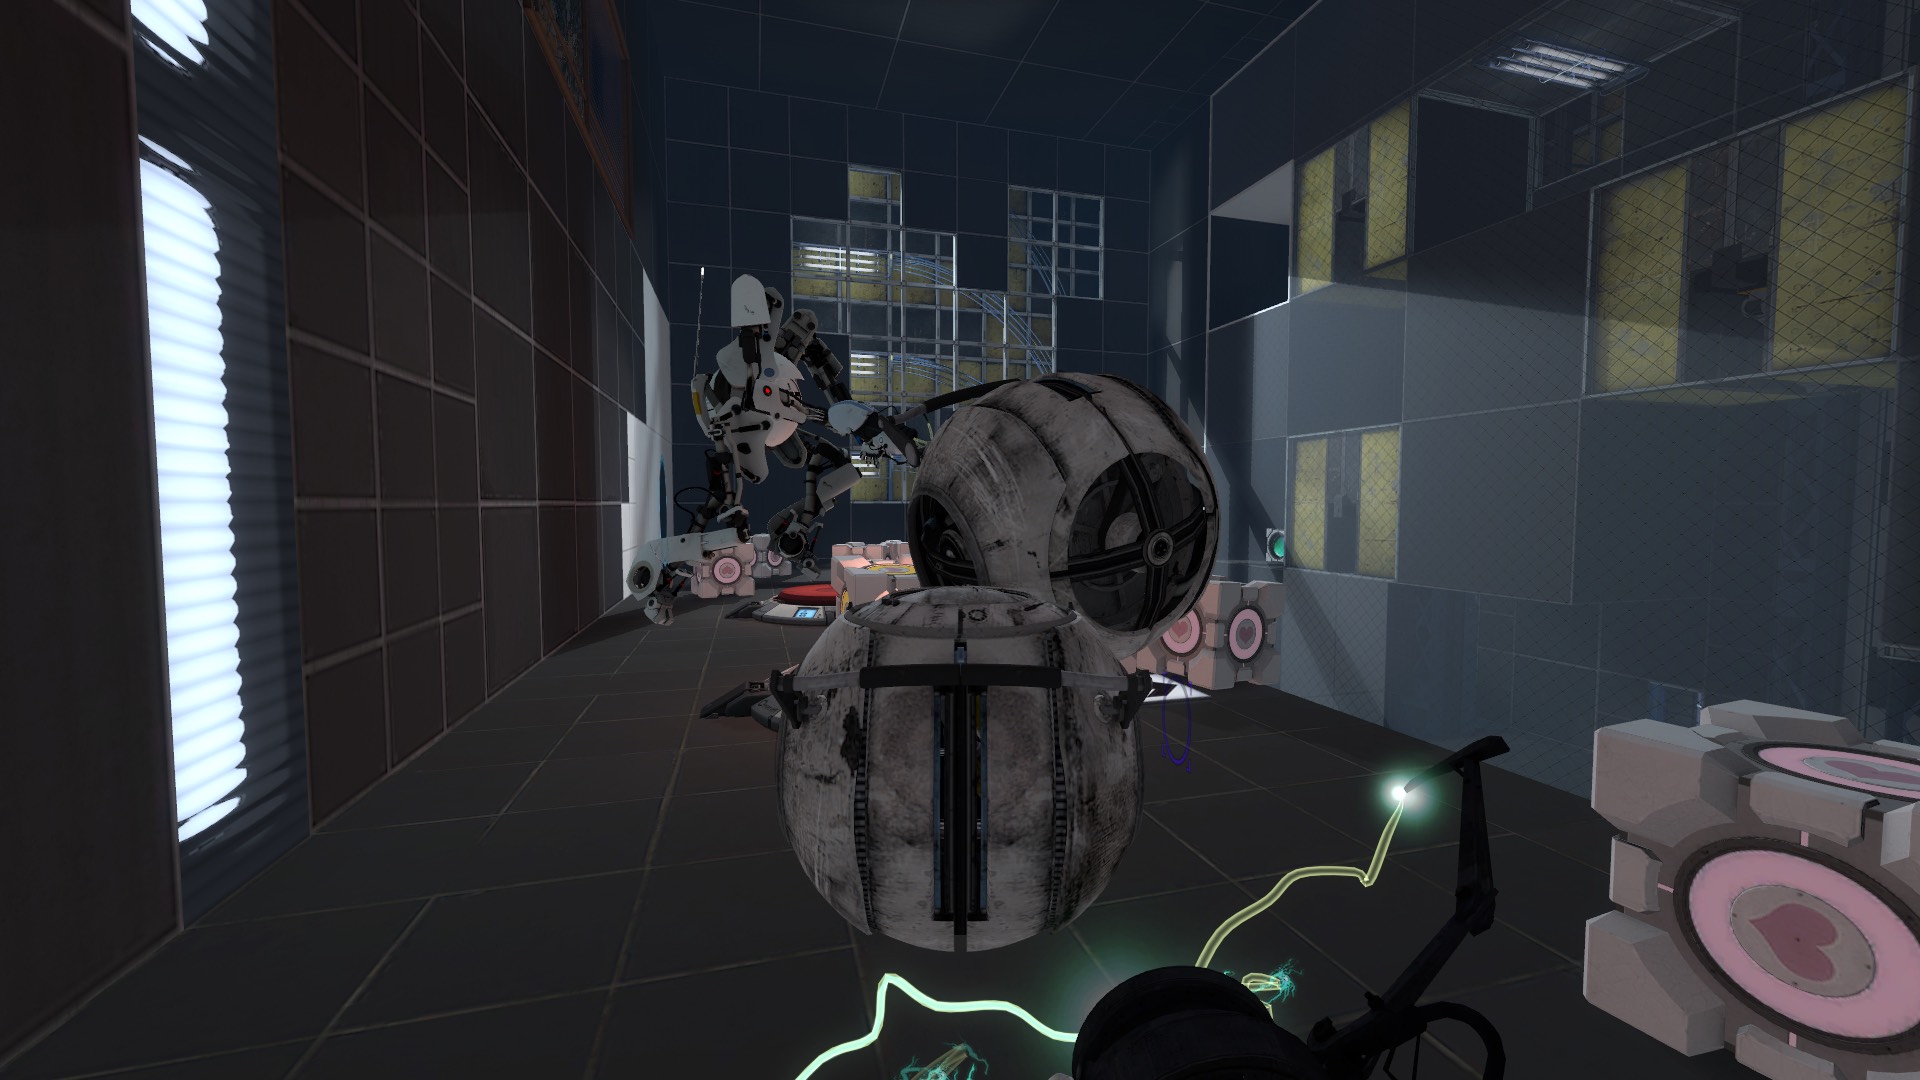 Screenshot of gameplay. Multiple Companion Cubes and Wheatley entities are present.